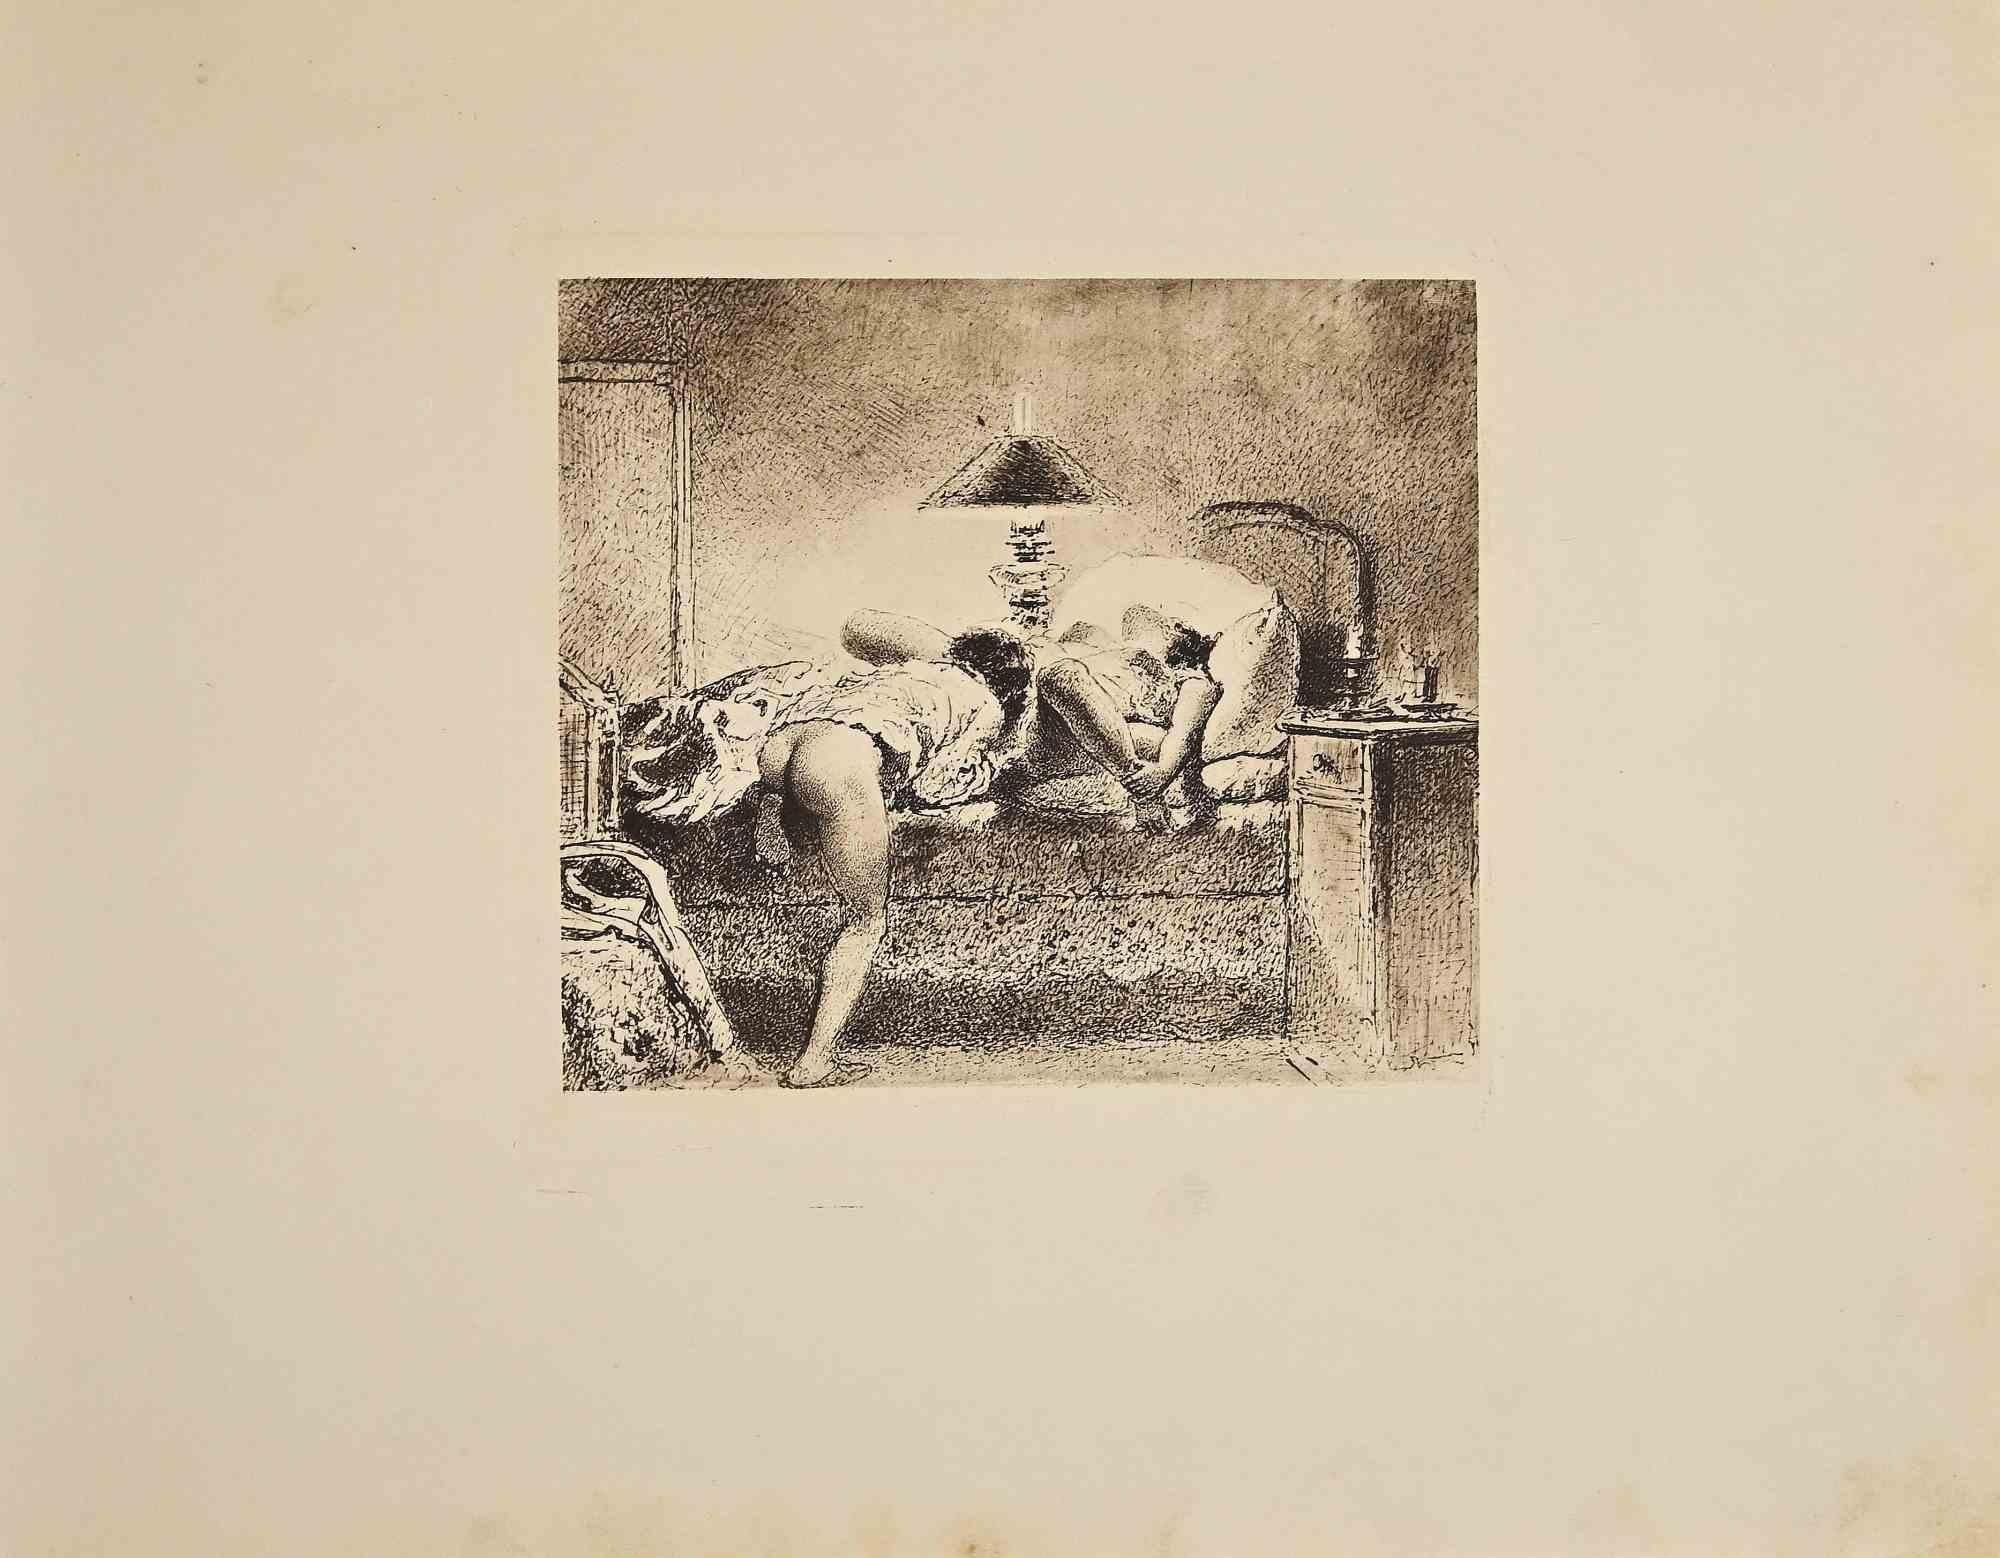 Erotic scene is an original Héliogravure artwork on ivory-colored paper, realized by Micheal Von Zichy in 1911.  Printed in only 300 copies, Leipzig; Privatdruck, from the Catalogue "Liebe" (Dear), Text in German on the plate,  The drawing created